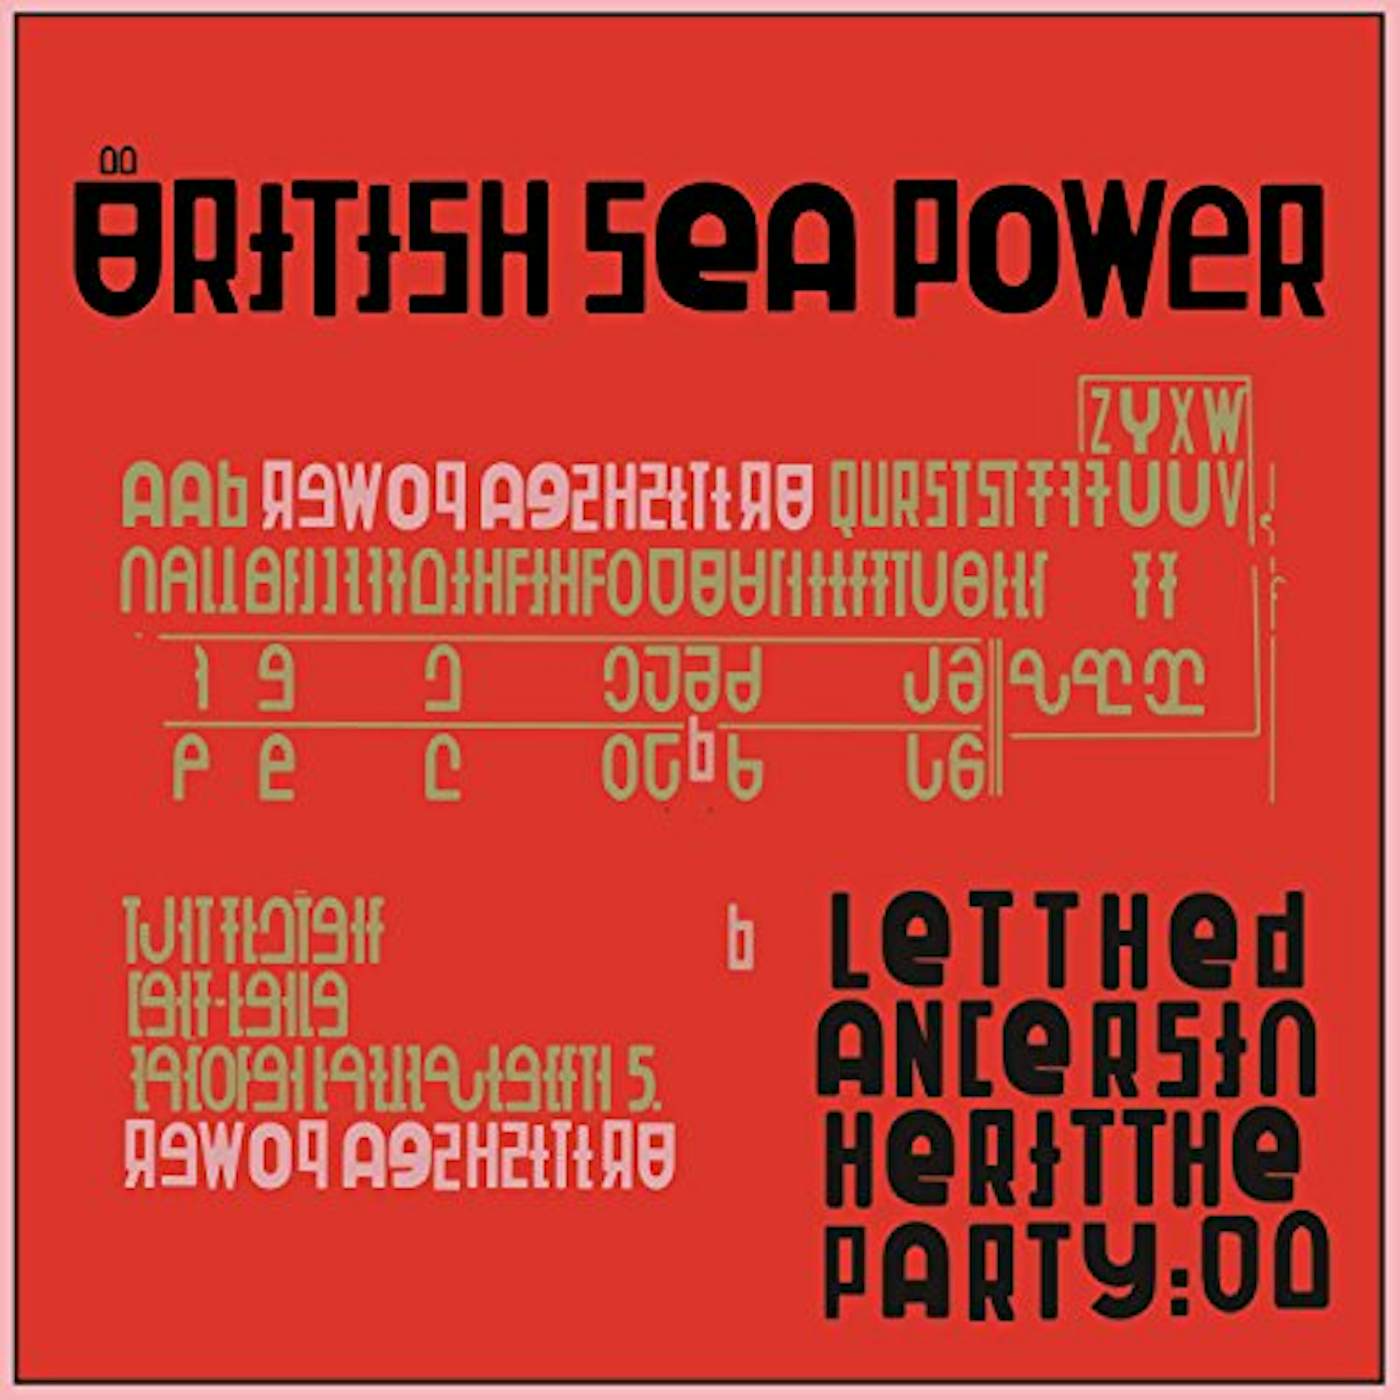 British Sea Power LET THE DANCERS INHERIT THE PARTY CD